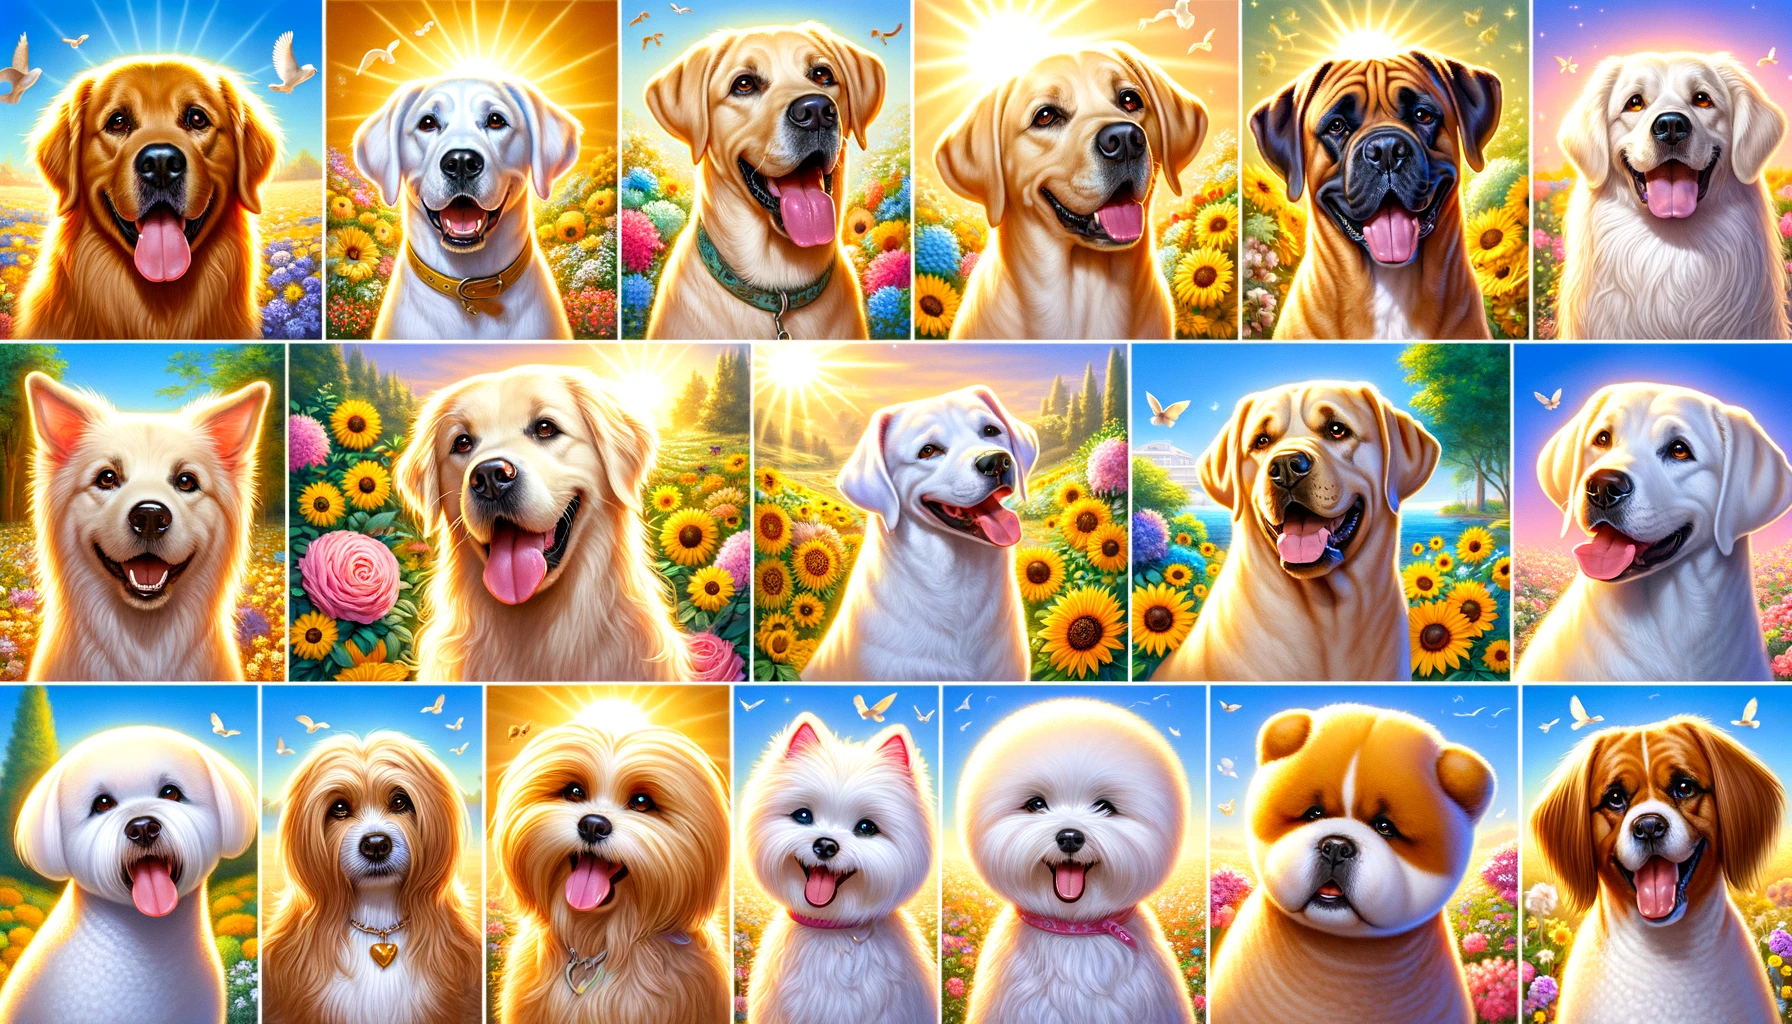 Create a bright and joyful image featuring a collage of ten light-skinned dog breeds, each showcasing its unique charm and beauty. These dogs include